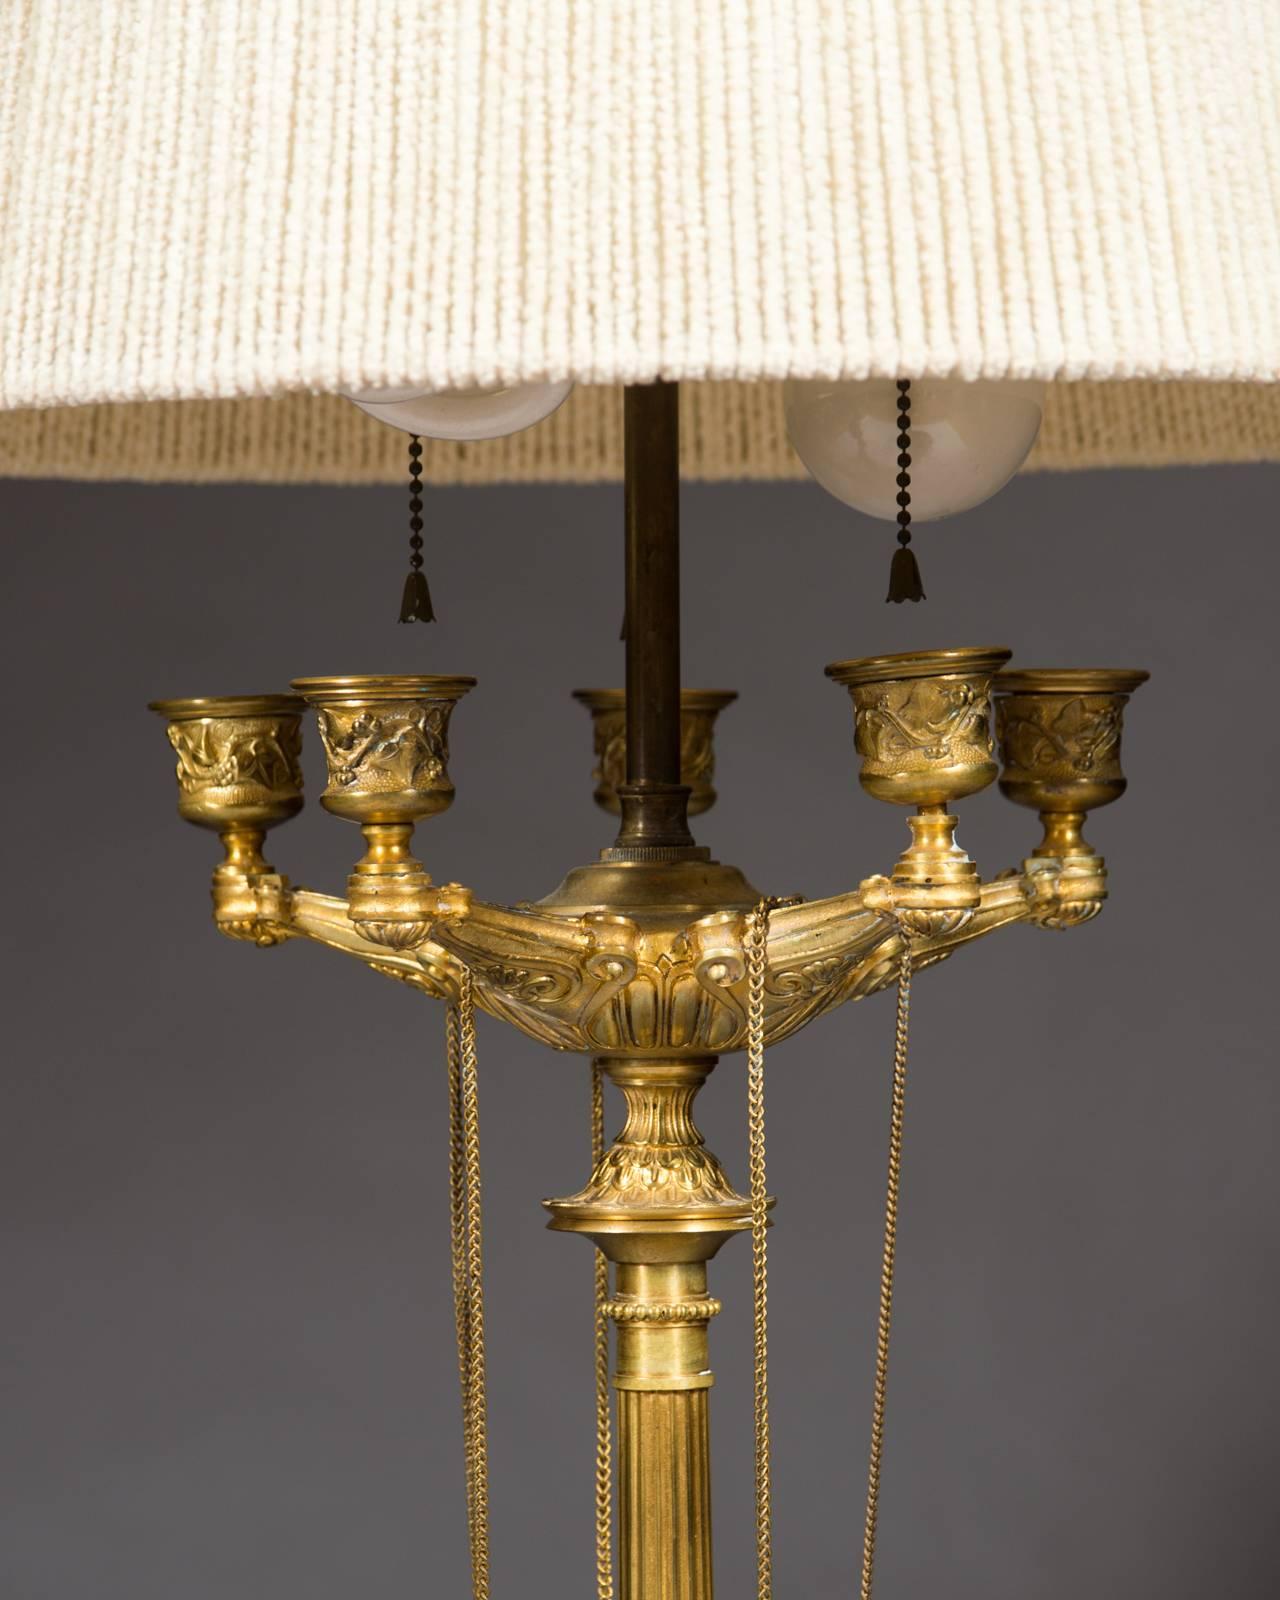 Napoleon III Very Fine Pair of 19th Century French Gilt Bronze Five-Branch Candelabras For Sale